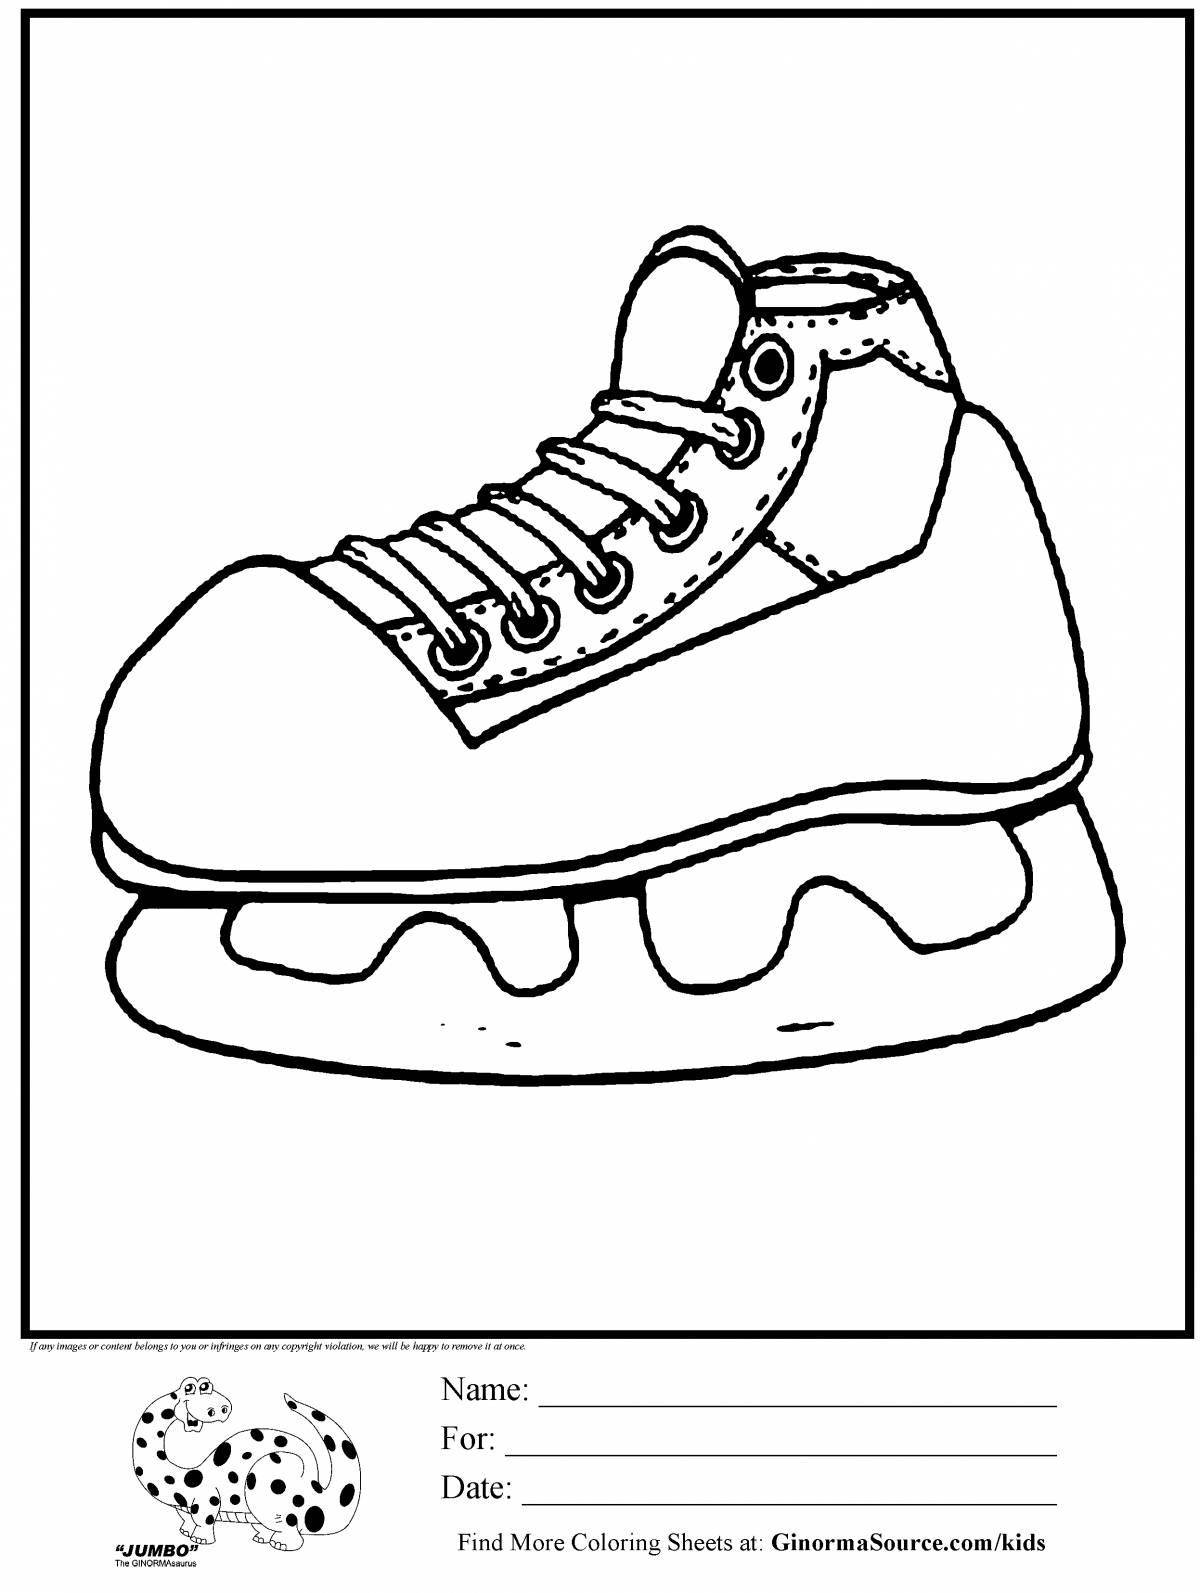 Jovial skates coloring book for 5-6 year olds